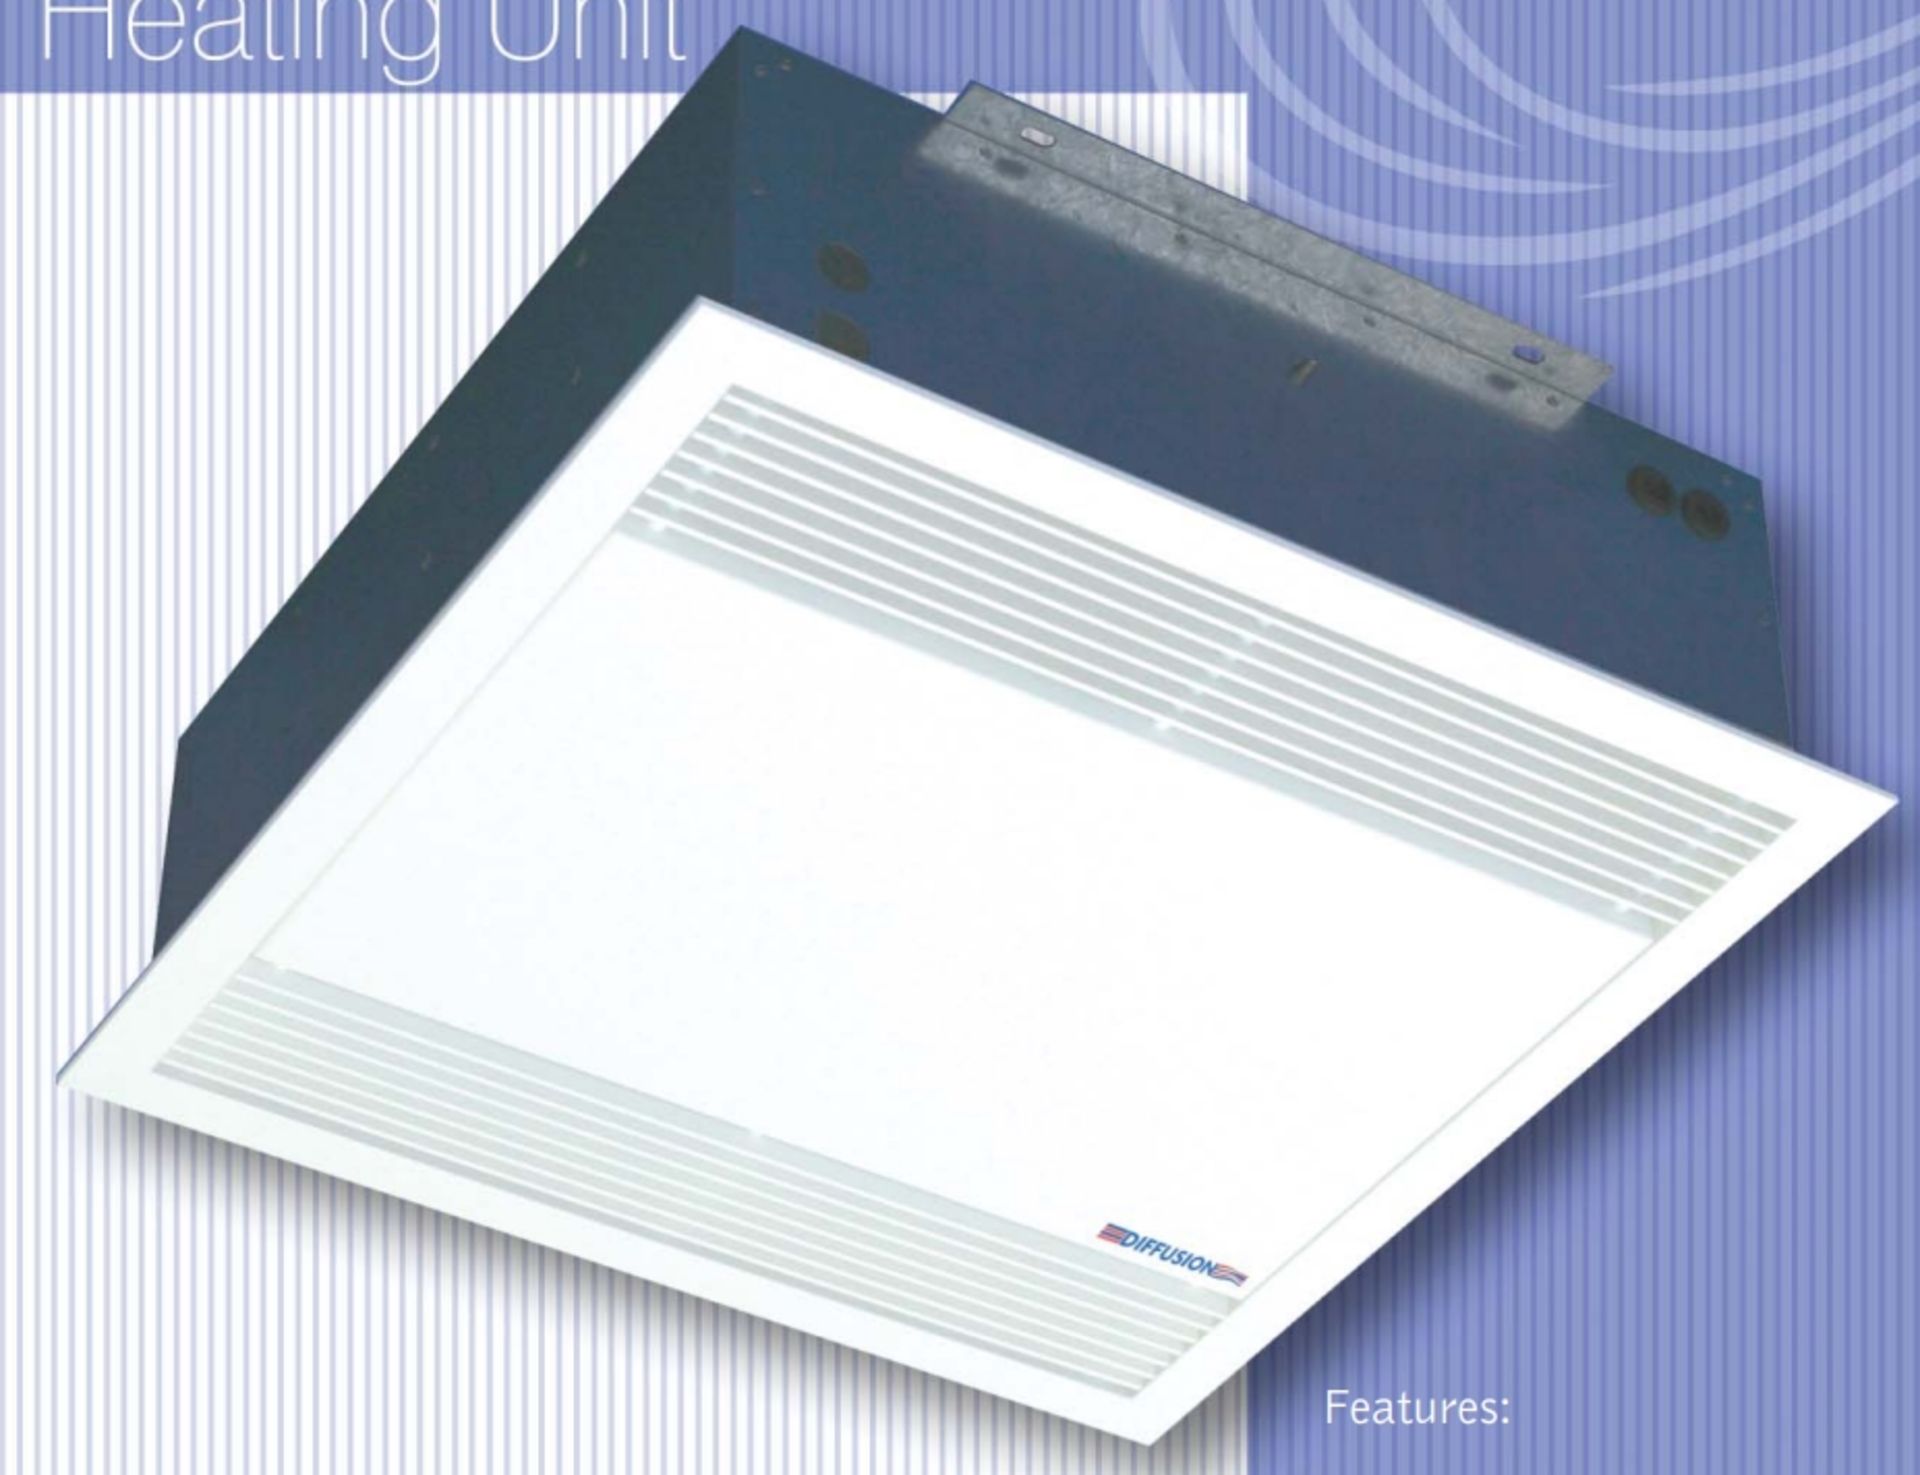 1 x Diffusion Suspended Ceiling 1.5kw Air Heating Unit - Size: 60 x 60 cms - Comes With Original Box - Image 4 of 10